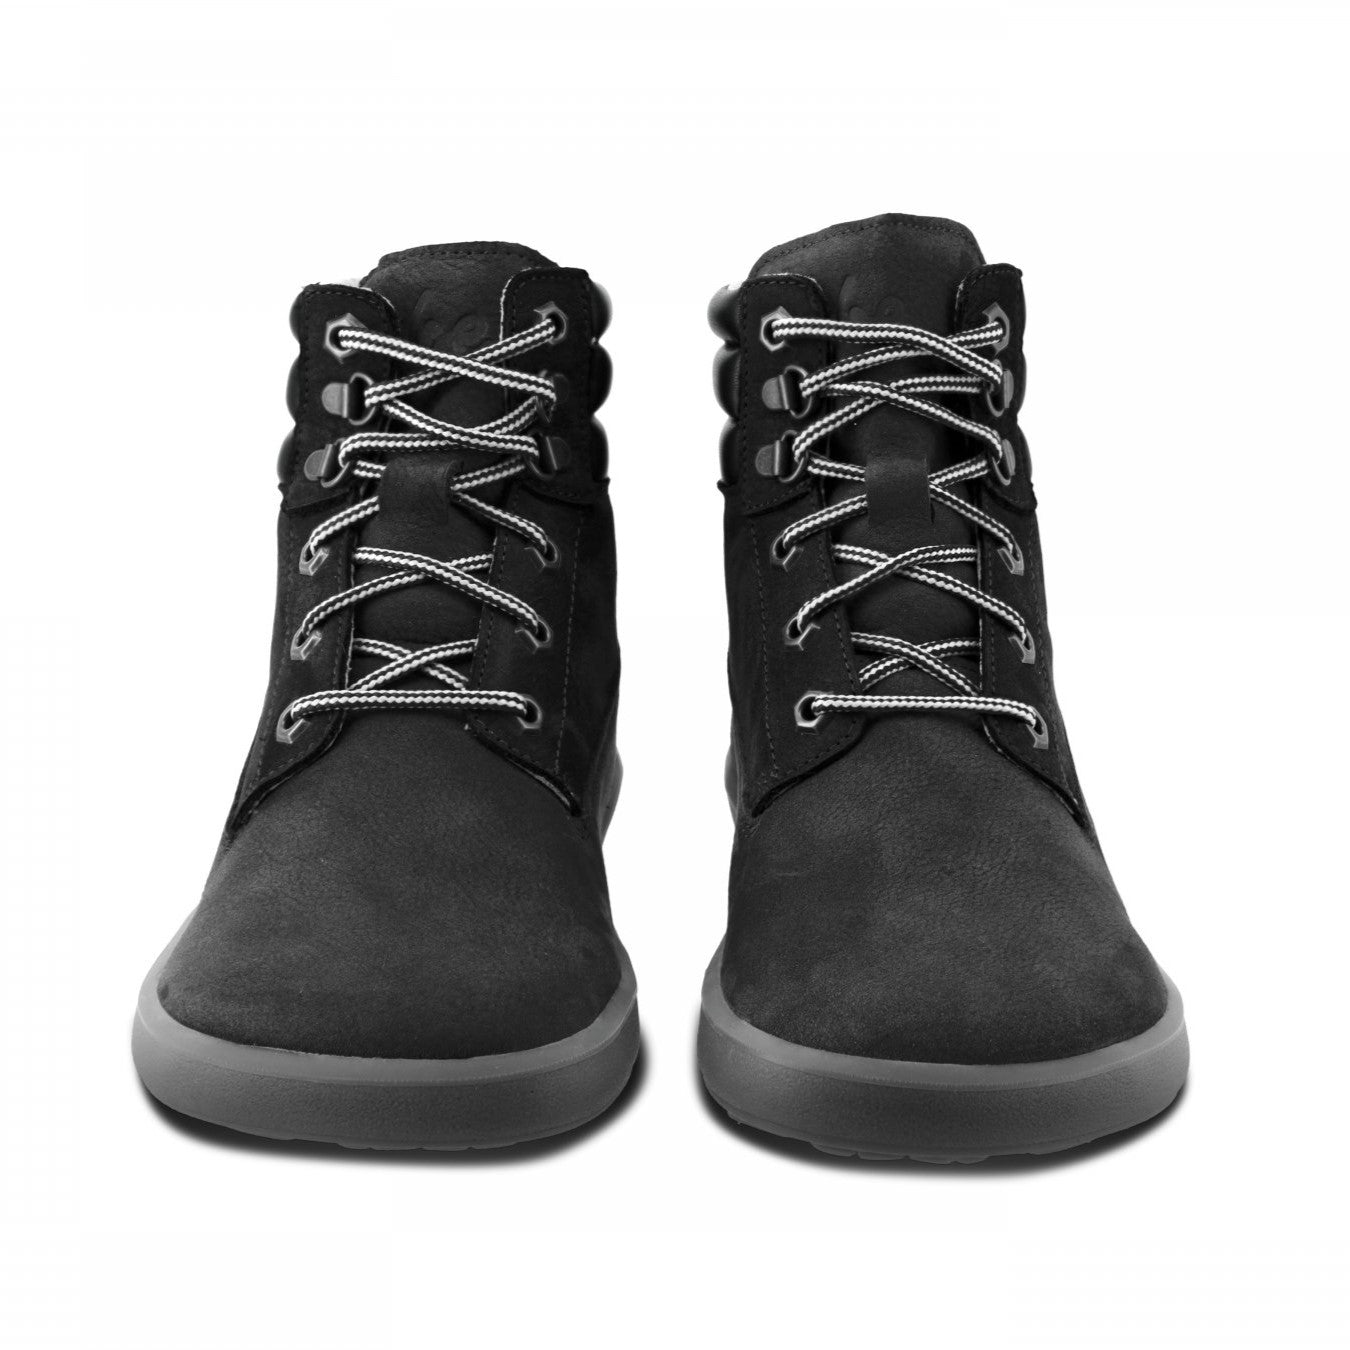 A photo of Be Lenka Nevada Boots made from nubuck leather and rubber soles. The boots are black in color, they are combat boot style with laces a padded color and a chunky eyelets. Both boots are shown beside each other from the front against a white background. #color_black